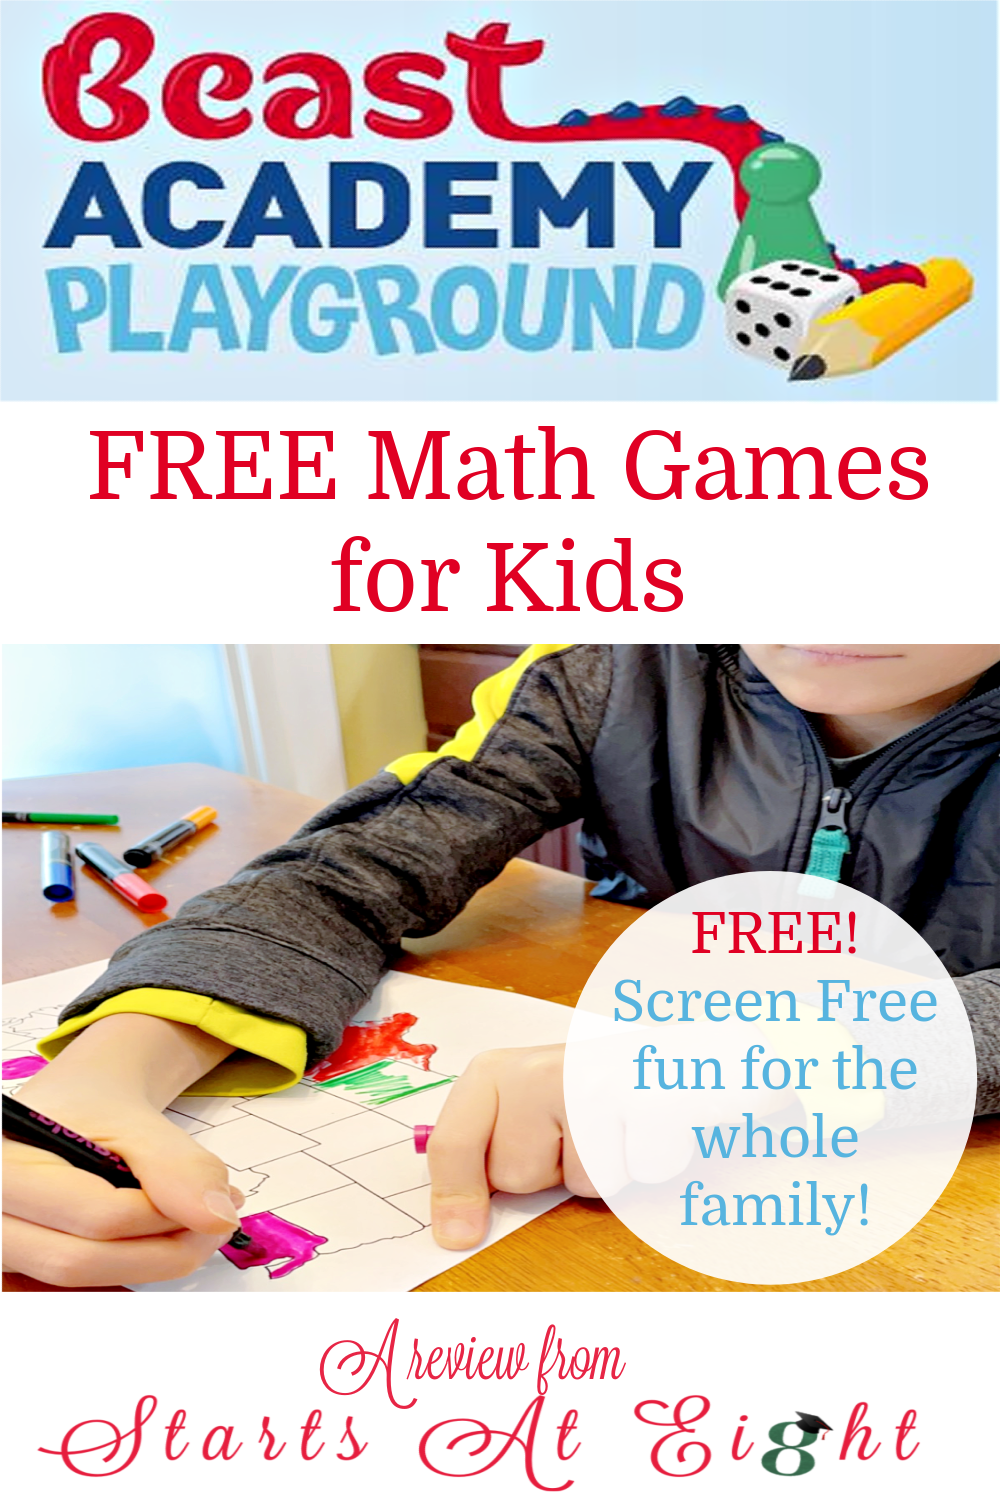 Beast Academy Playground - FREE Math Games for Kids ages 4 & up. Fun, simple to create, screen free, educational games for the whole family! A review from Starts At Eight